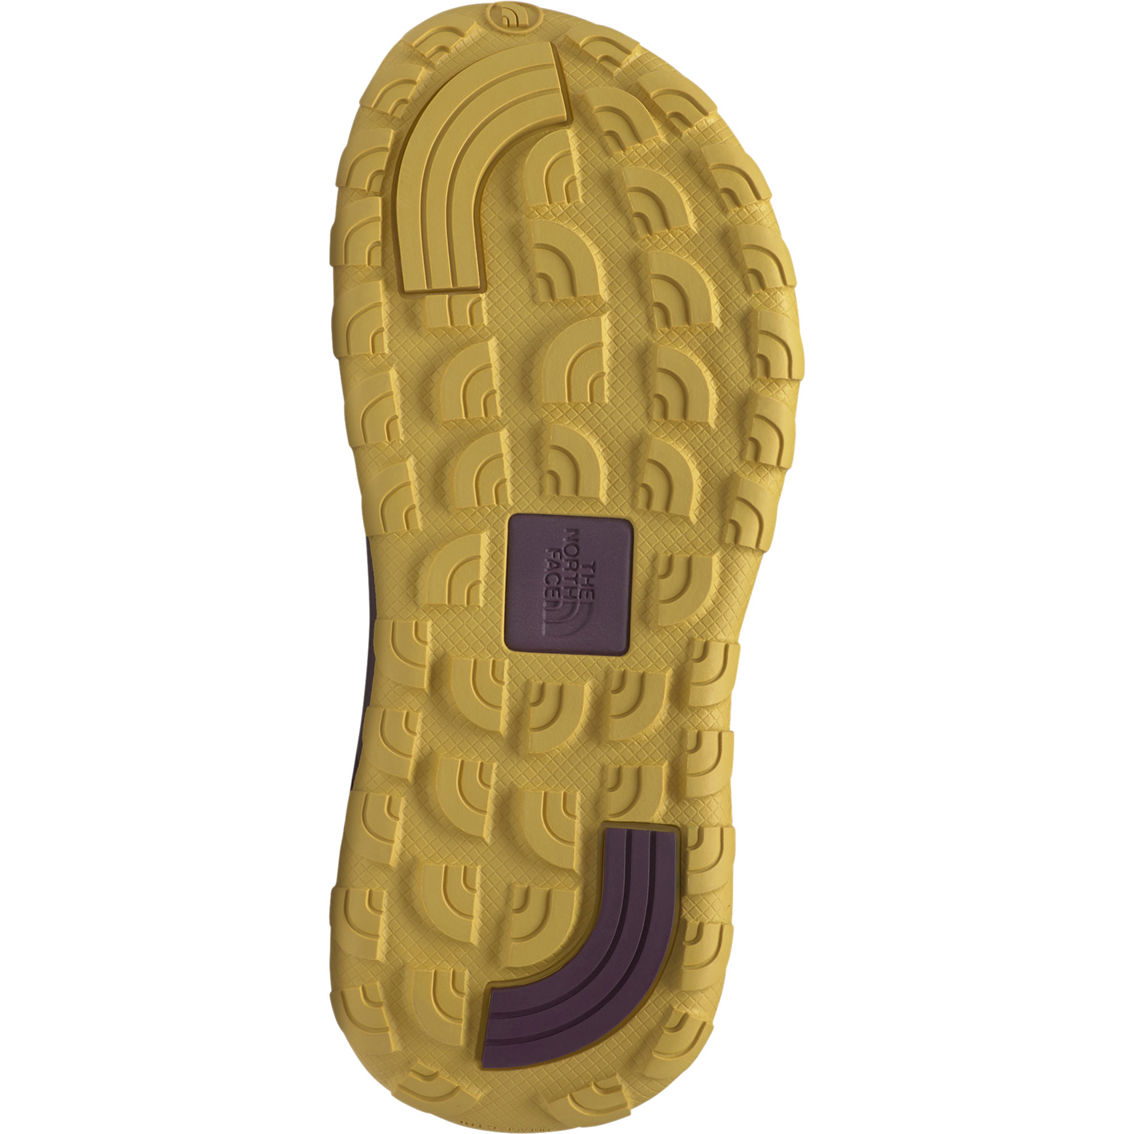 The North Face Women's Explore Camp Sandals - Image 3 of 4